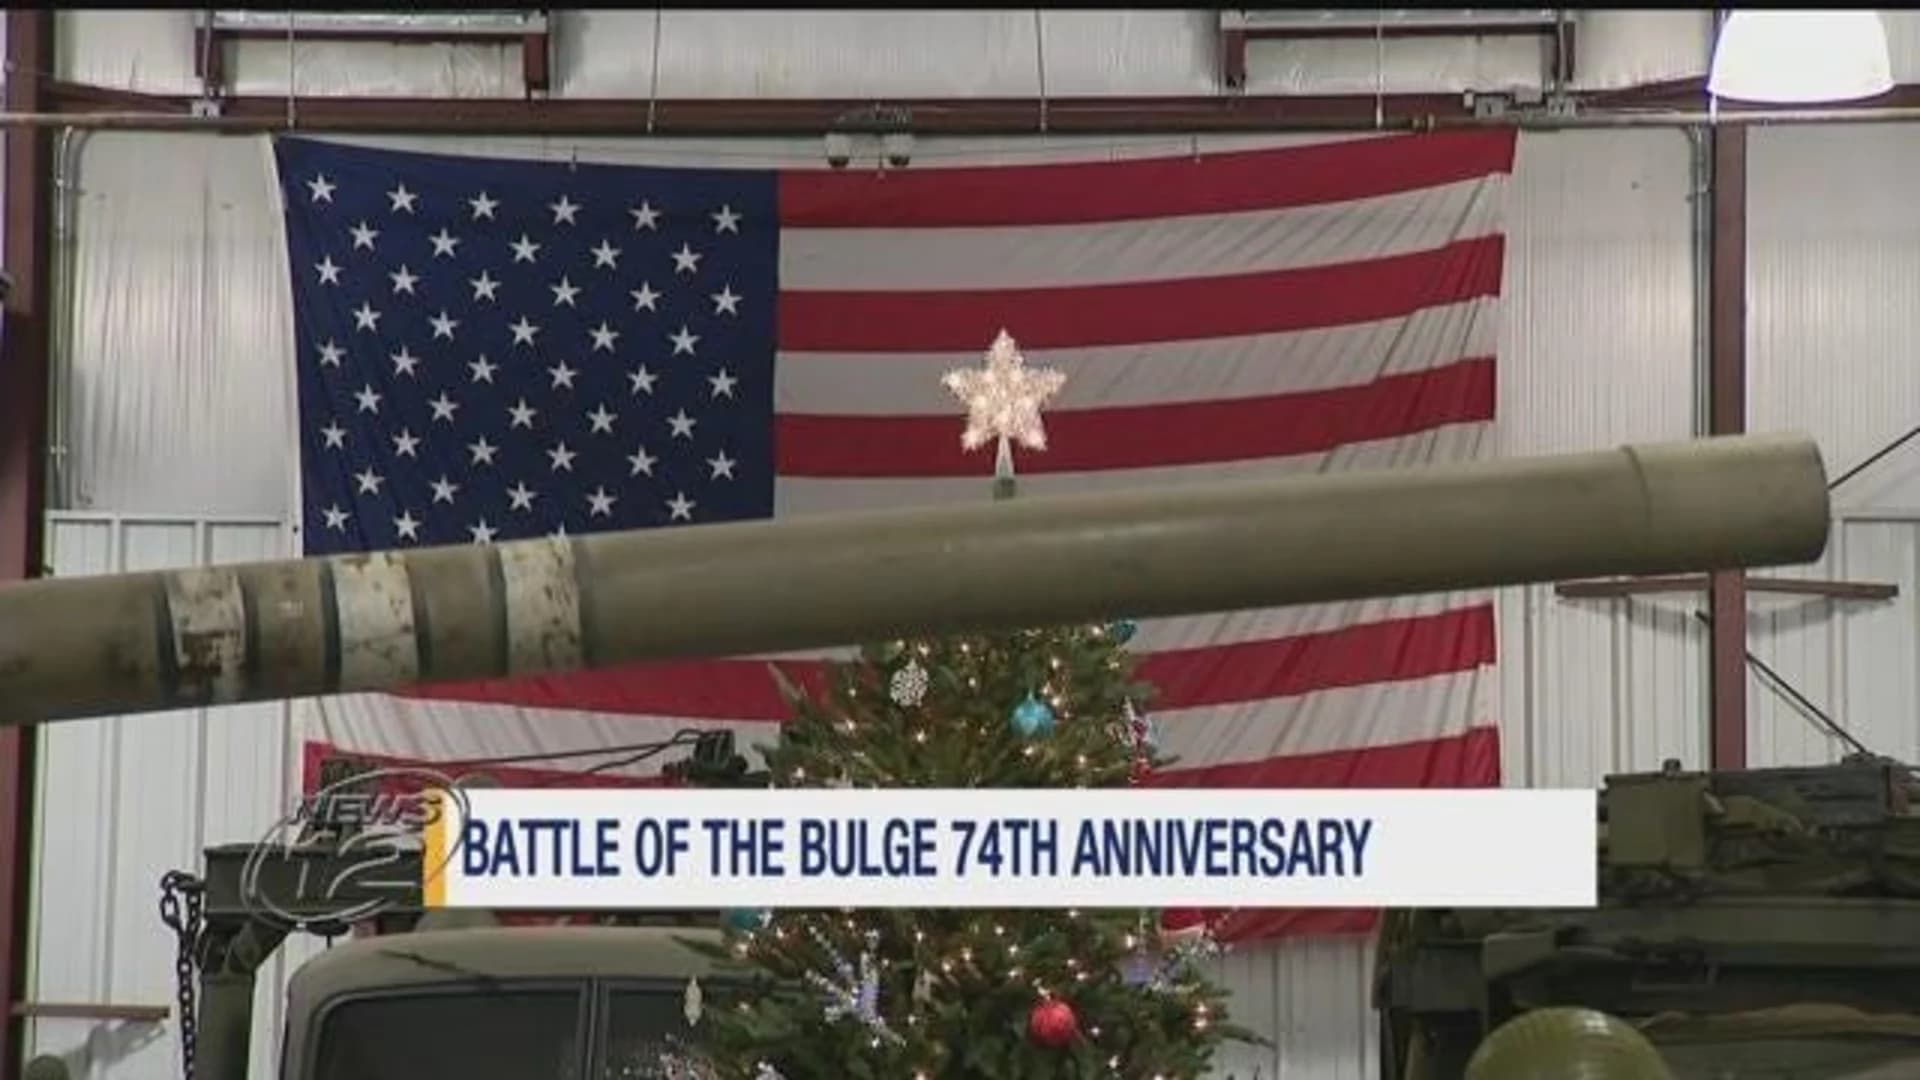 Old Bethpage museum honors Americans killed during Battle of the Bulge